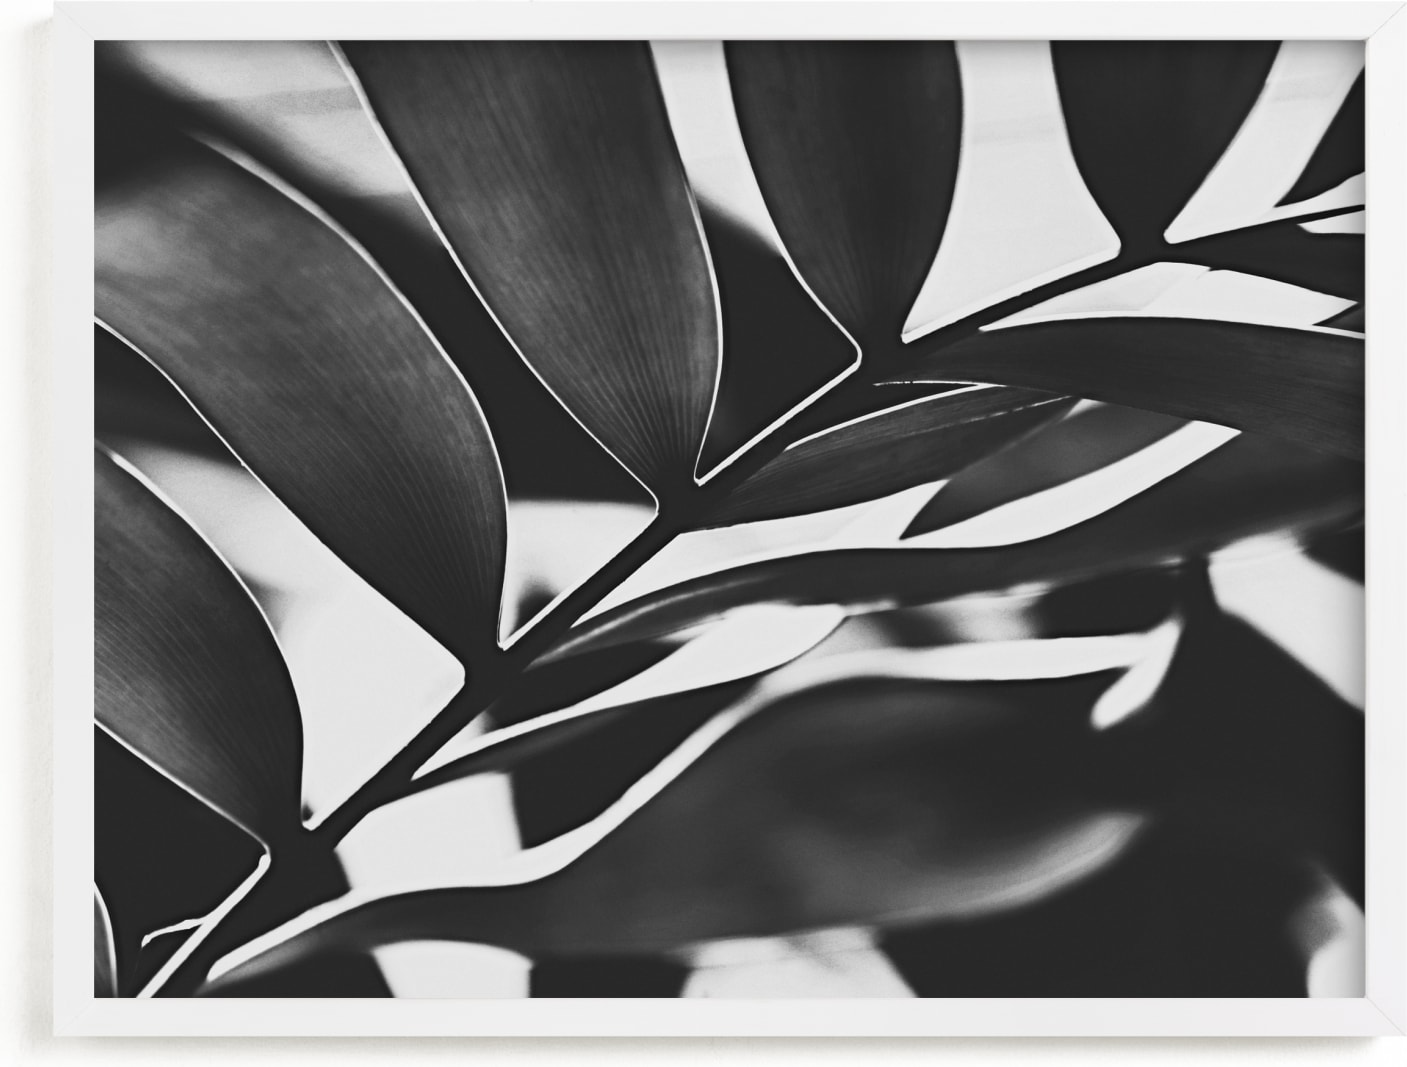 This is a black and white art by Amy Chapman Braun called GLOWING BOTANICAL I.